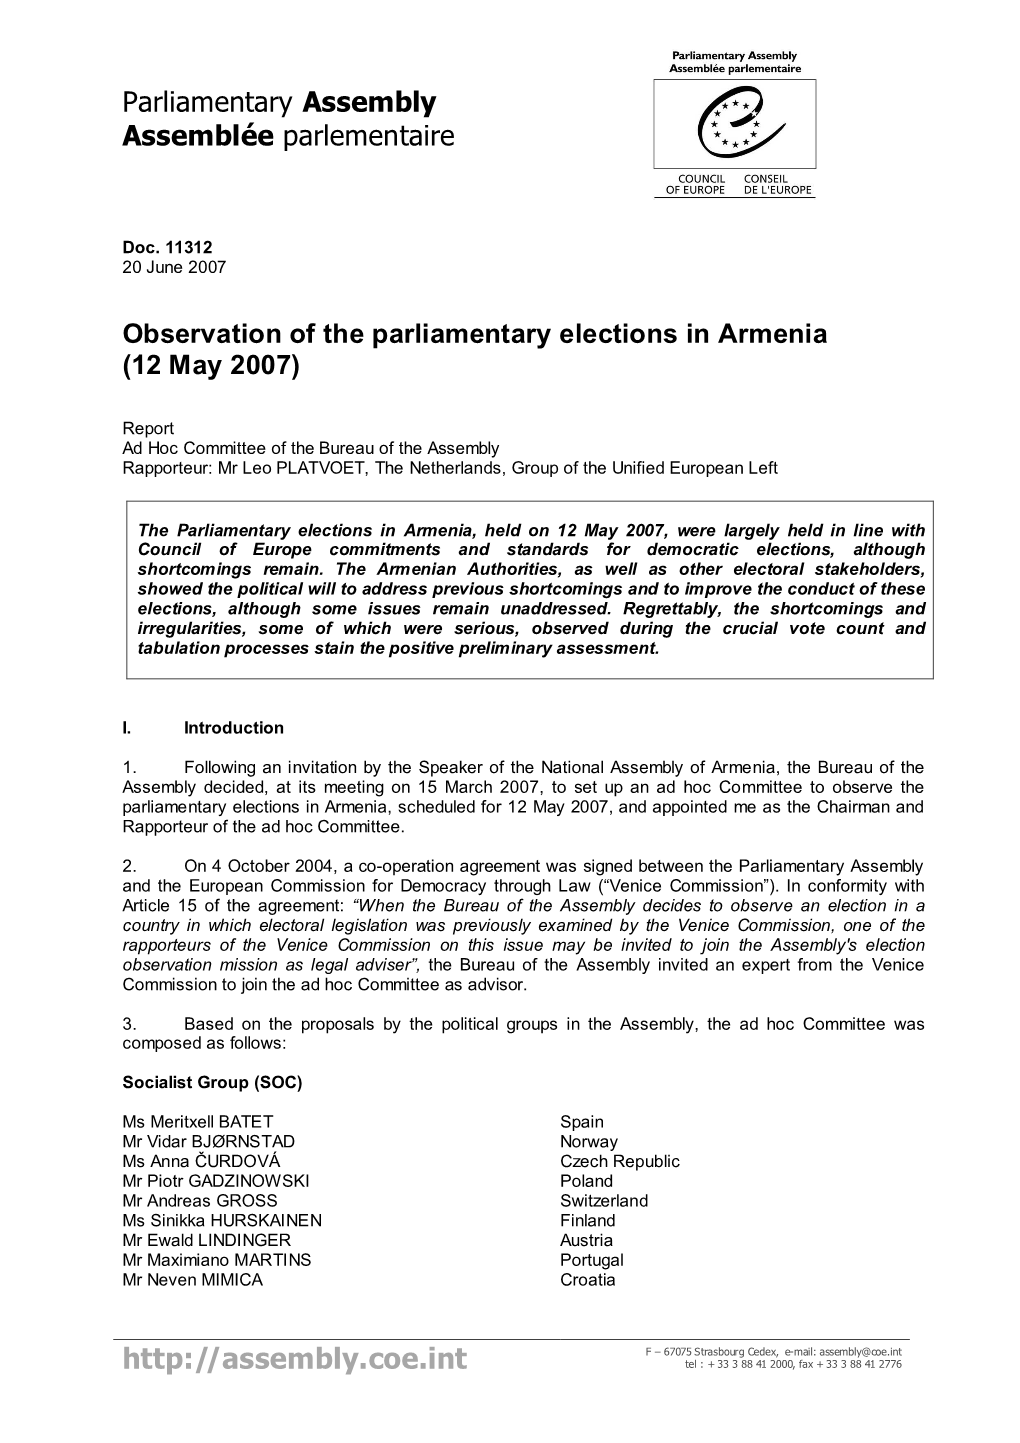 Observation of the Parliamentary Elections in Armenia (12 May 2007)